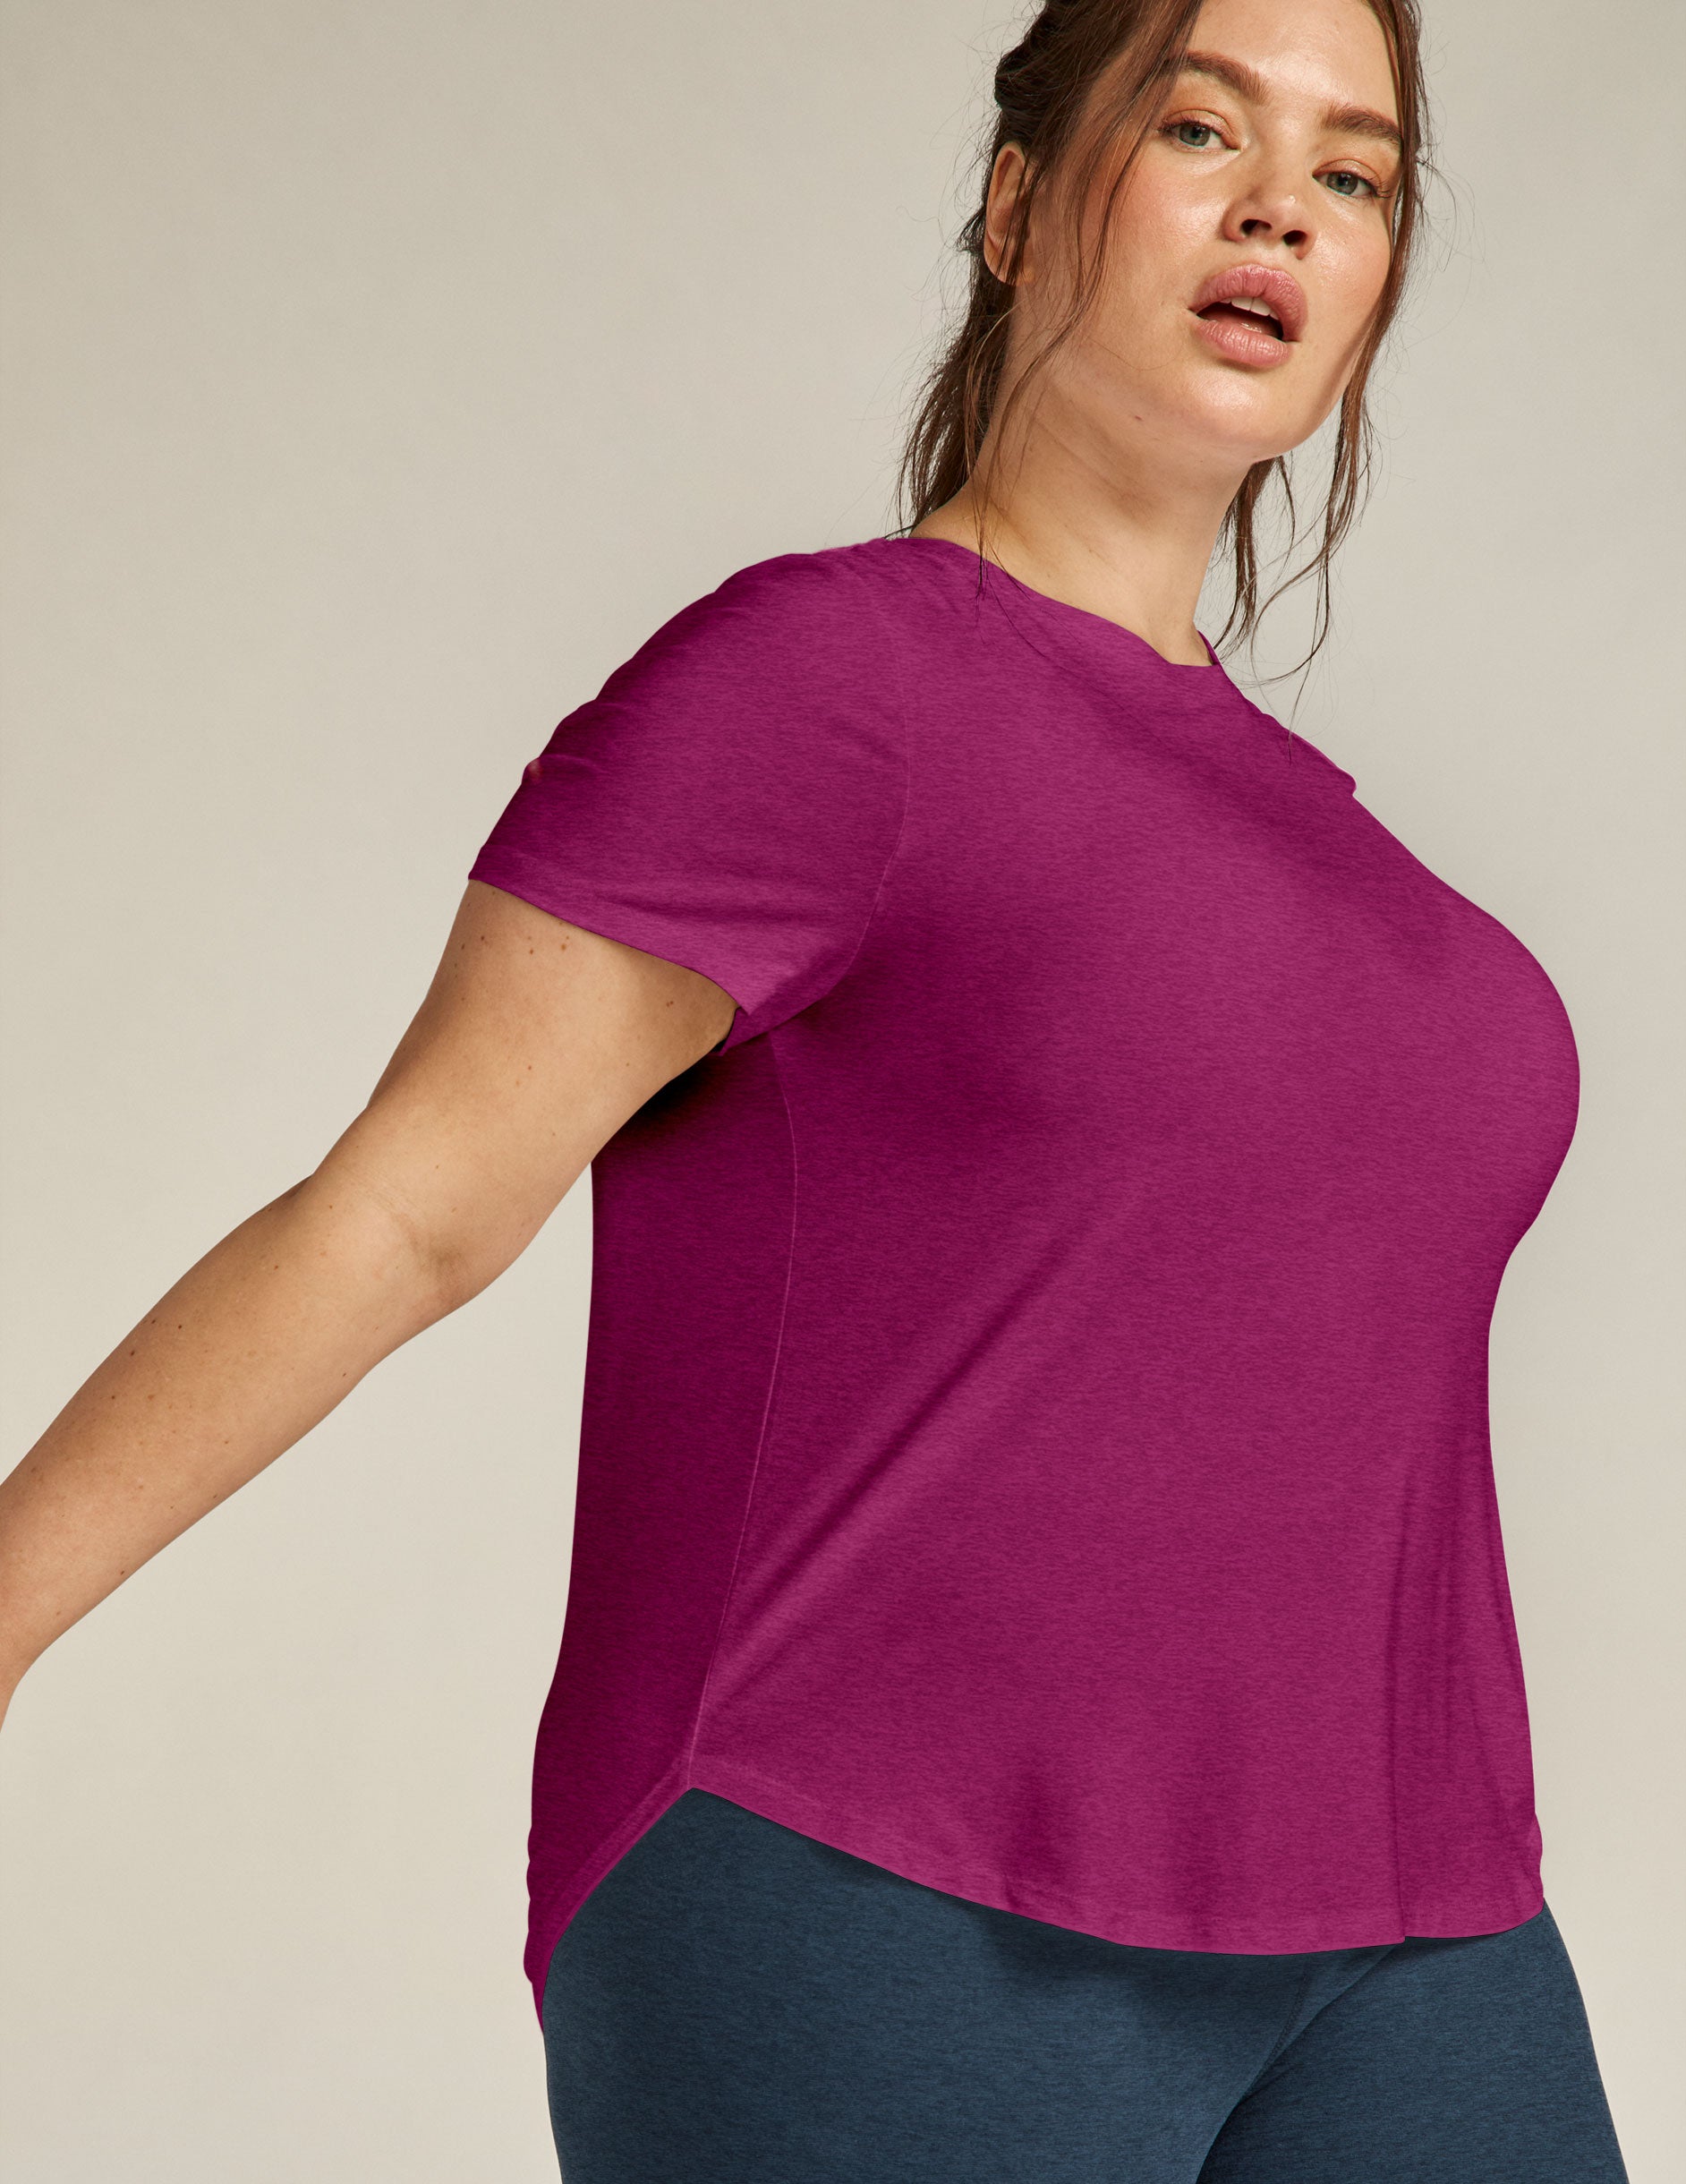 Beyond Yoga on X: Fig Heather = Your Fall power color 💜 https